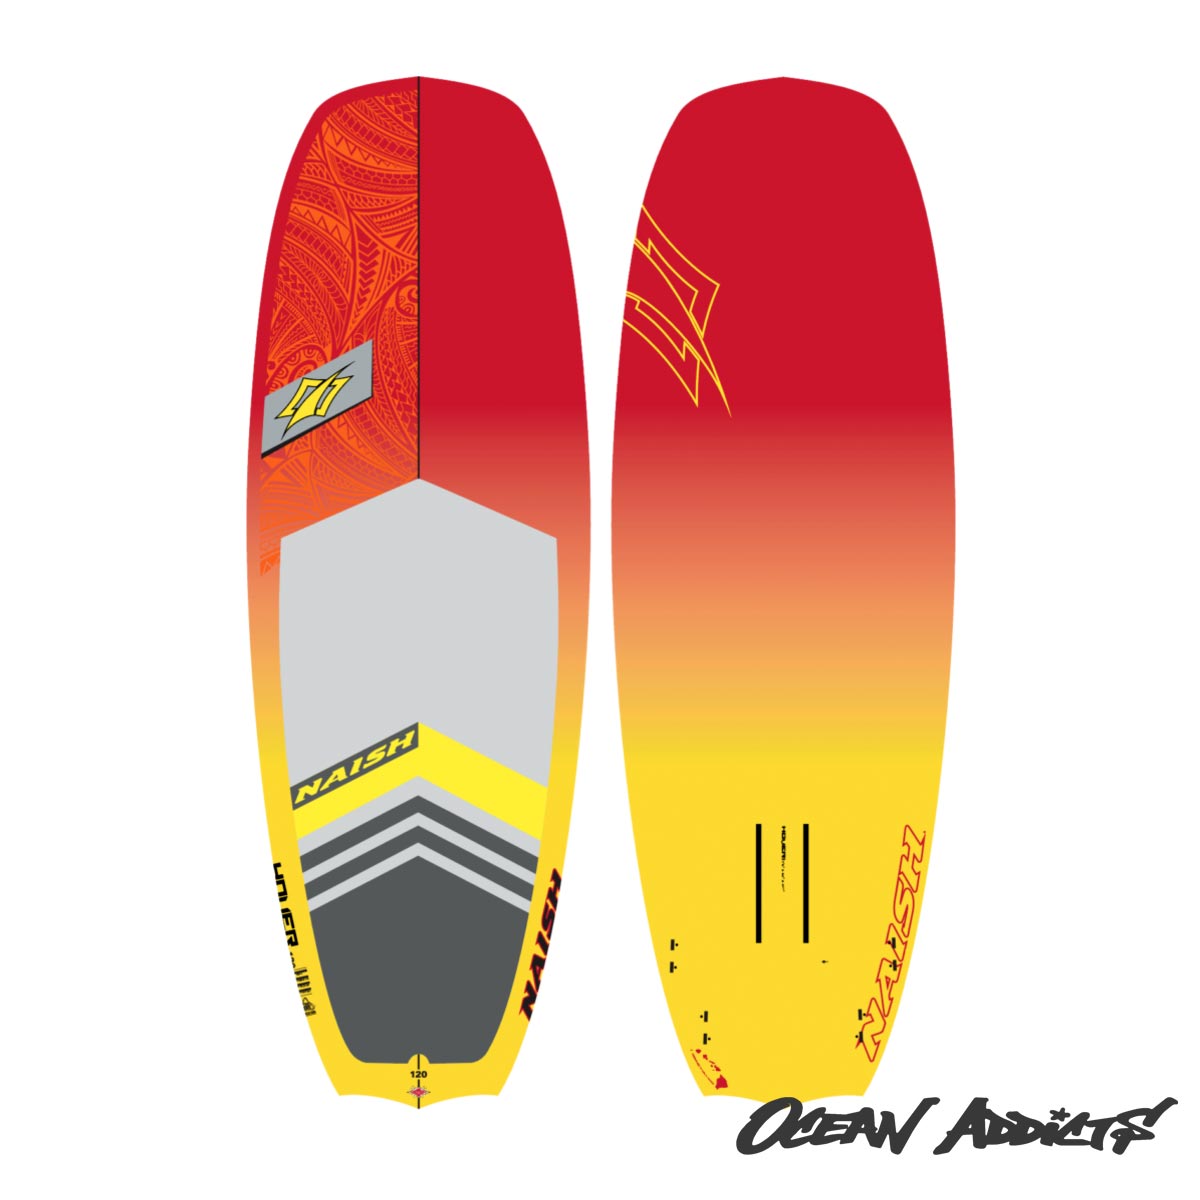 2018 Naish Hover 120 SUP Foilboard, Buy Online - BEST PRICE